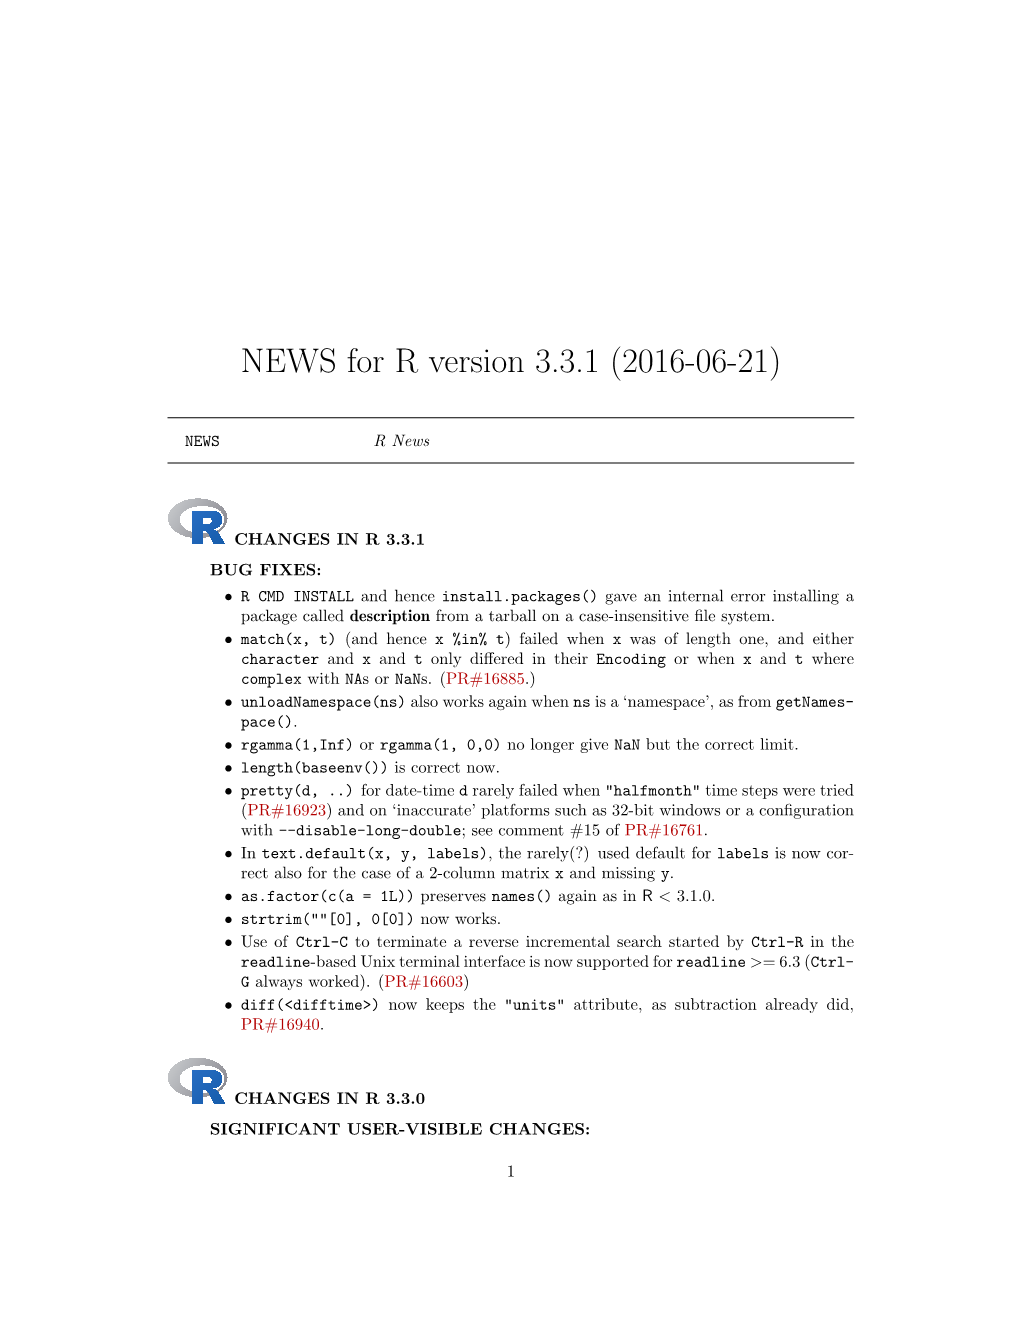 NEWS for R Version 3.3.1 (2016-06-21)